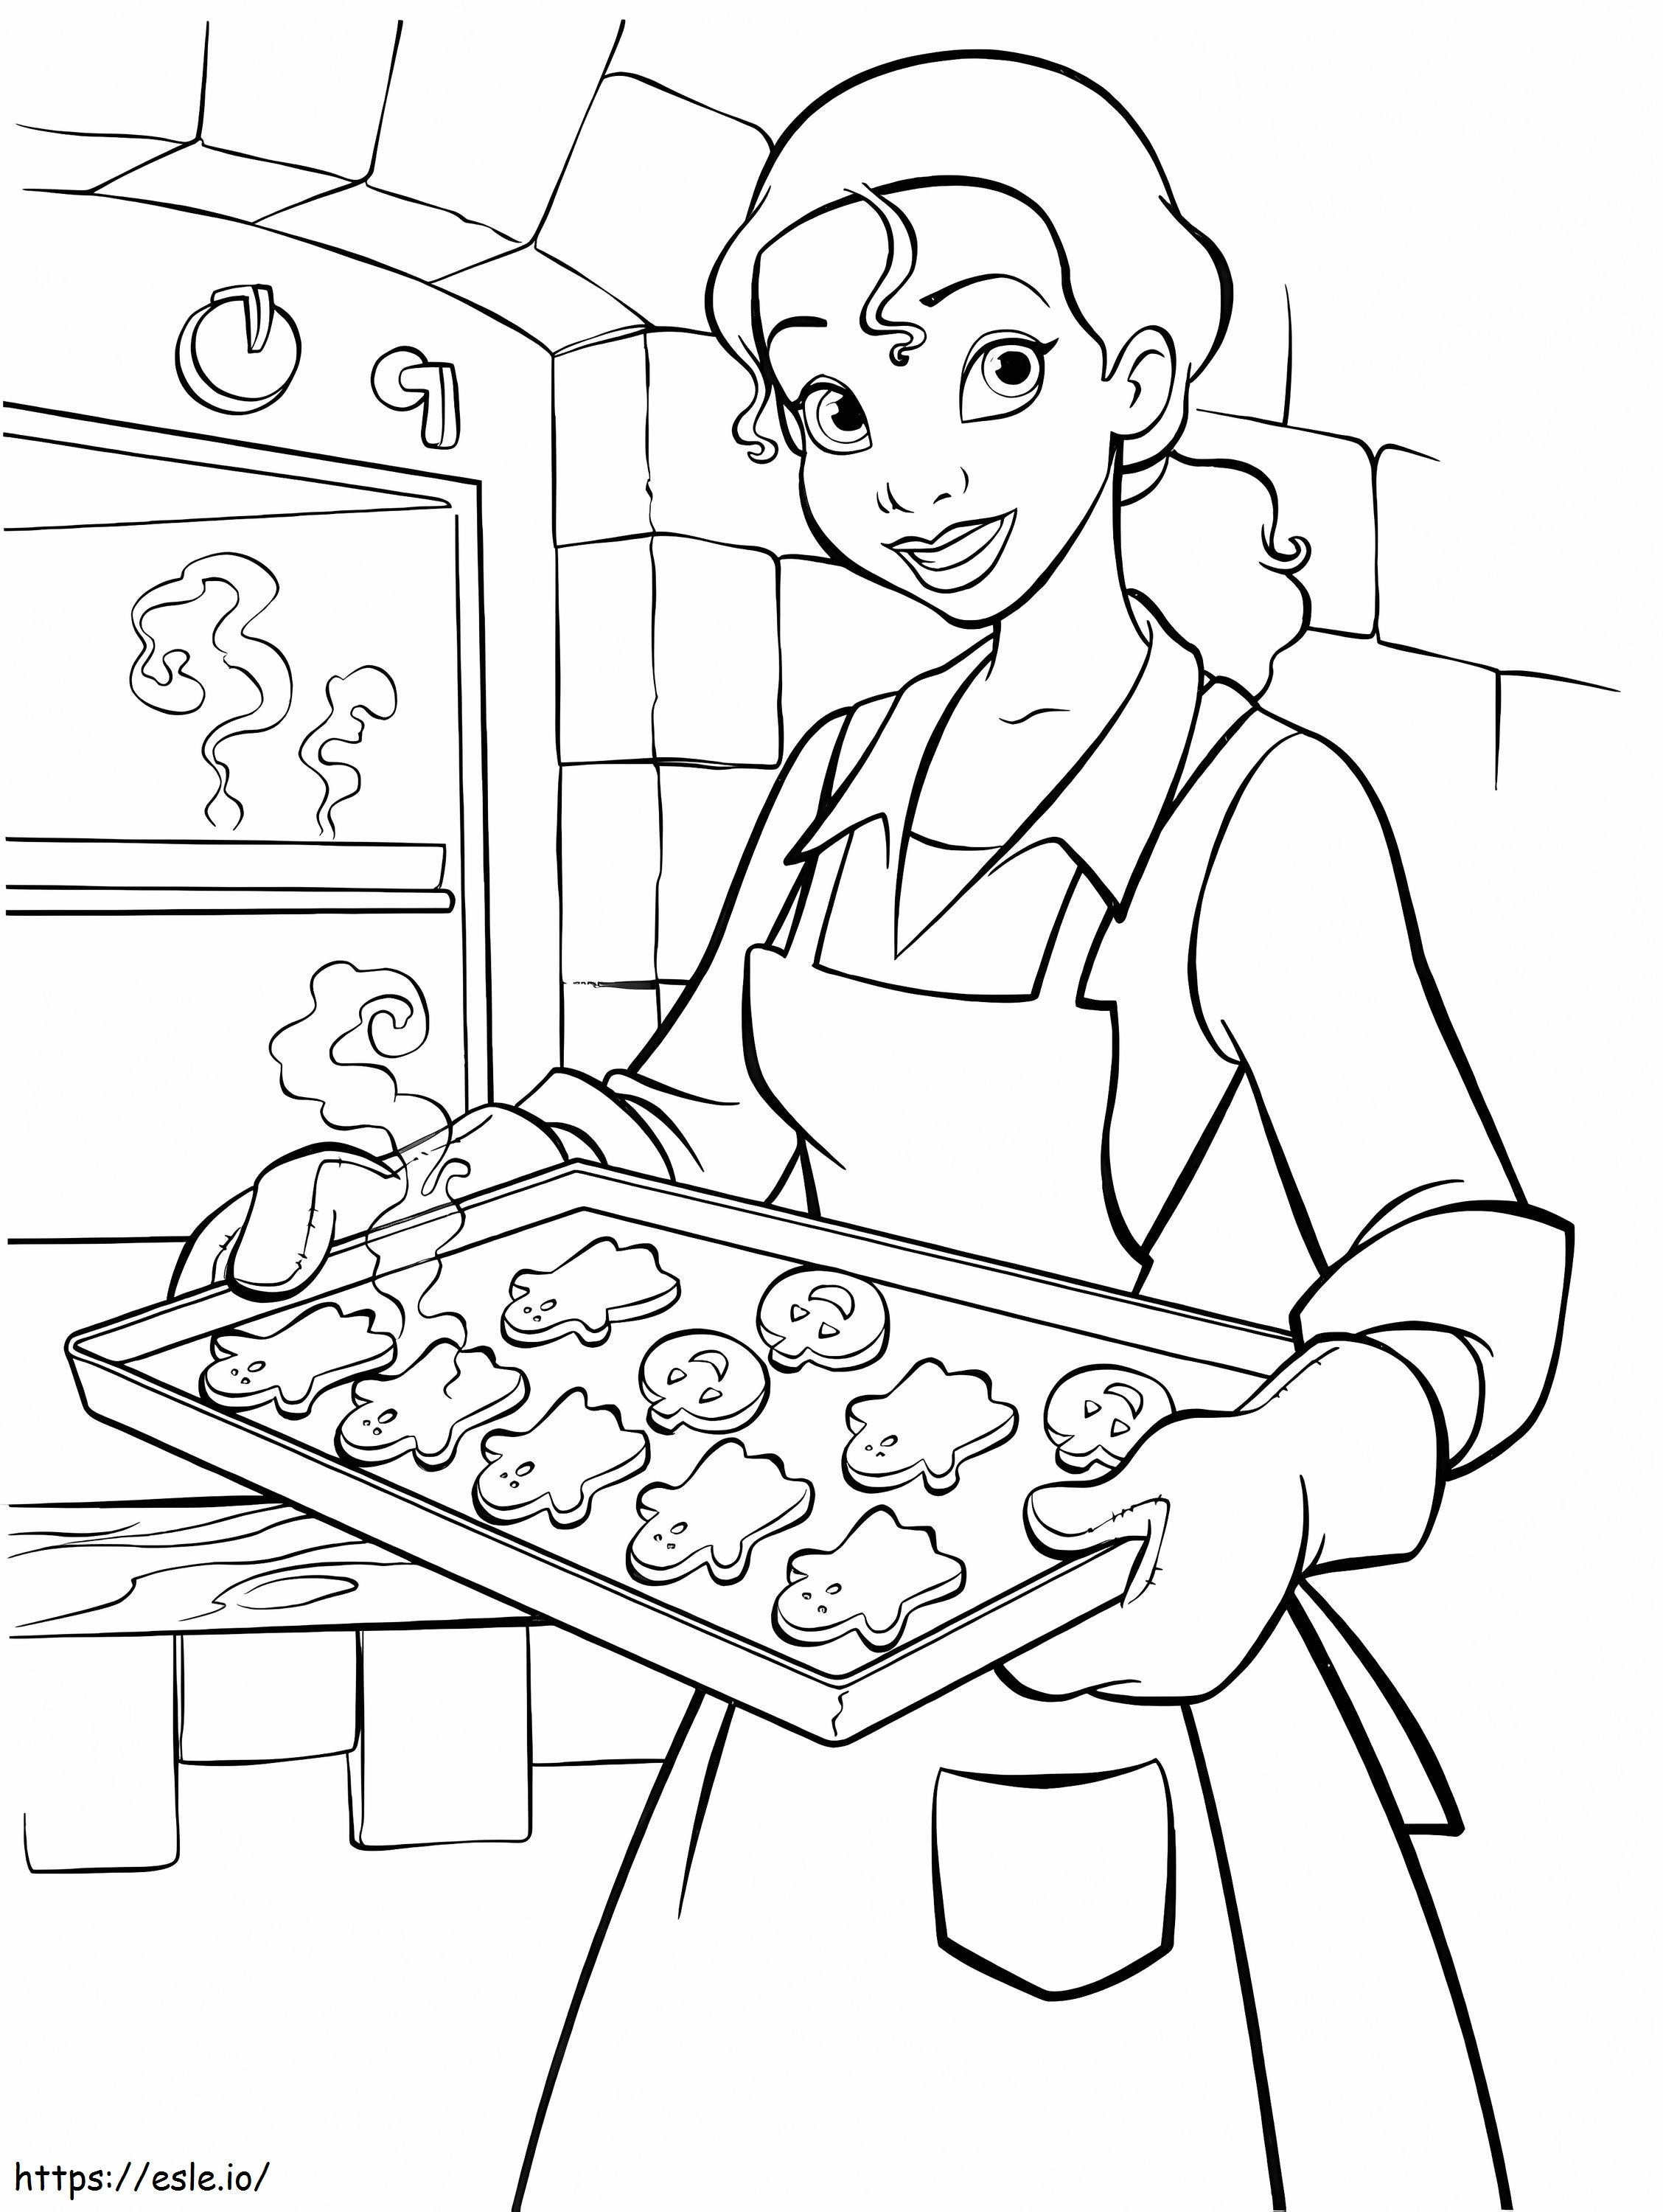 Princess And The Frog 6 coloring page